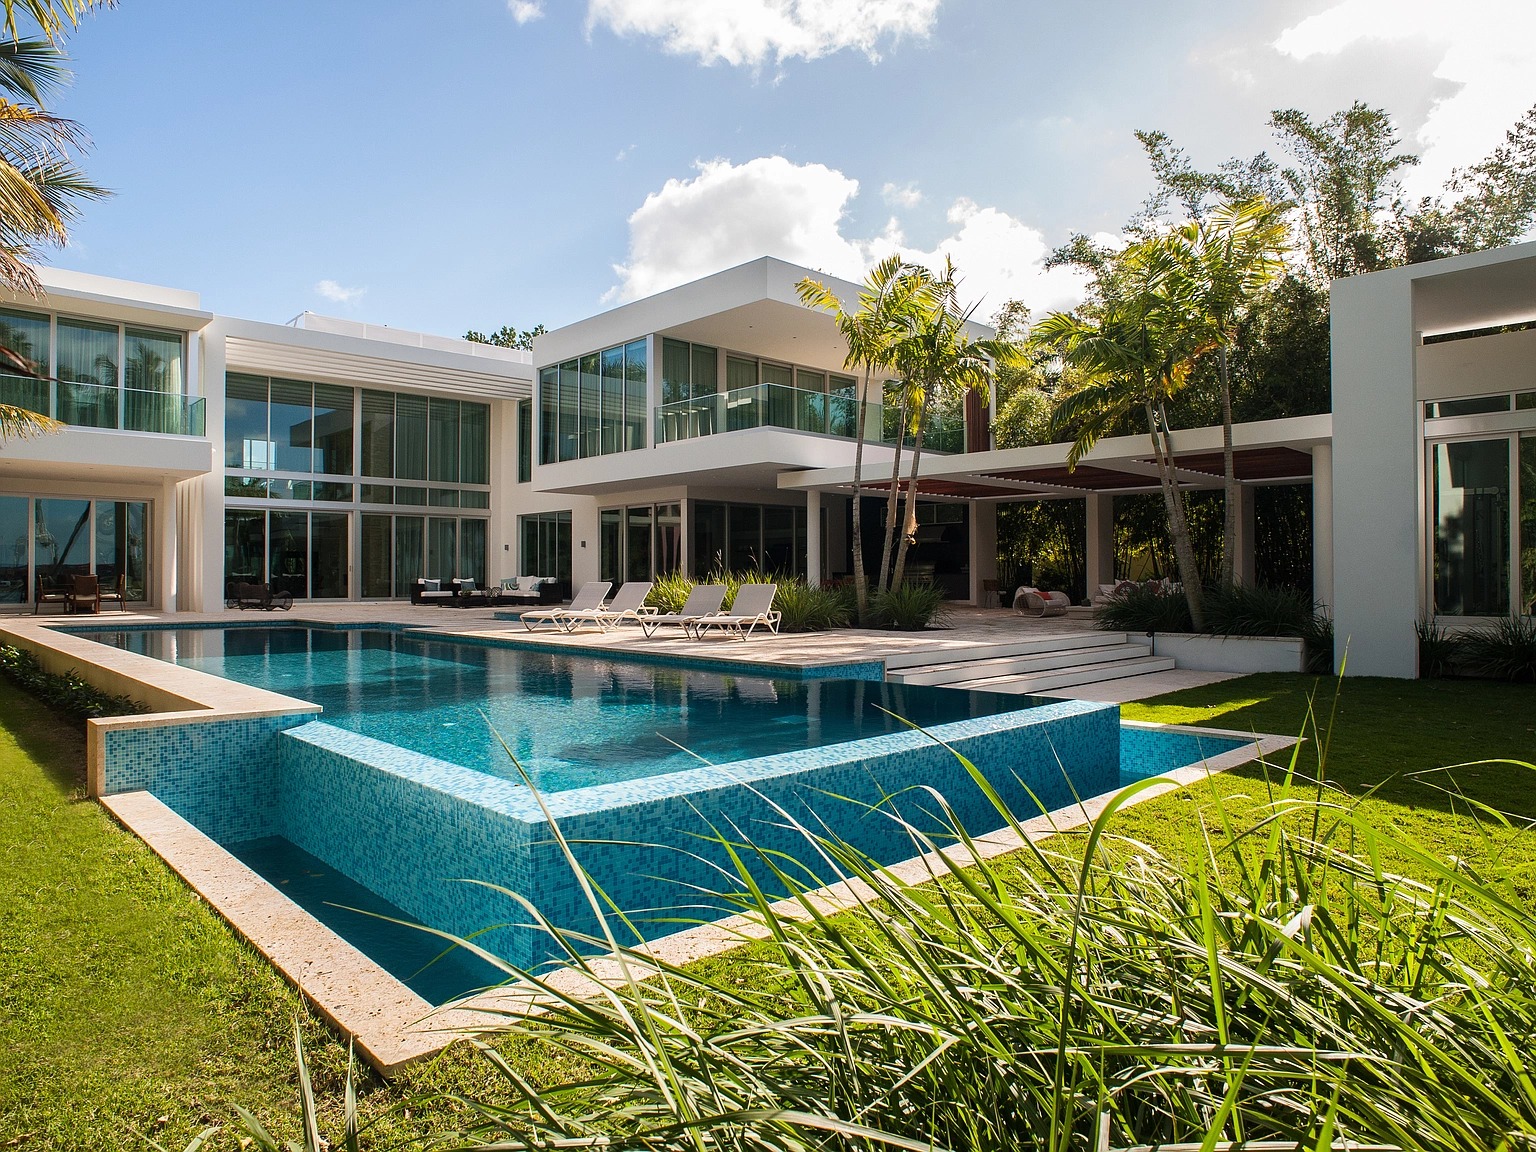 30 Palm Ave, Miami Beach, FL 33139 - $29,000,000 home for sale, house images, photos and pics gallery